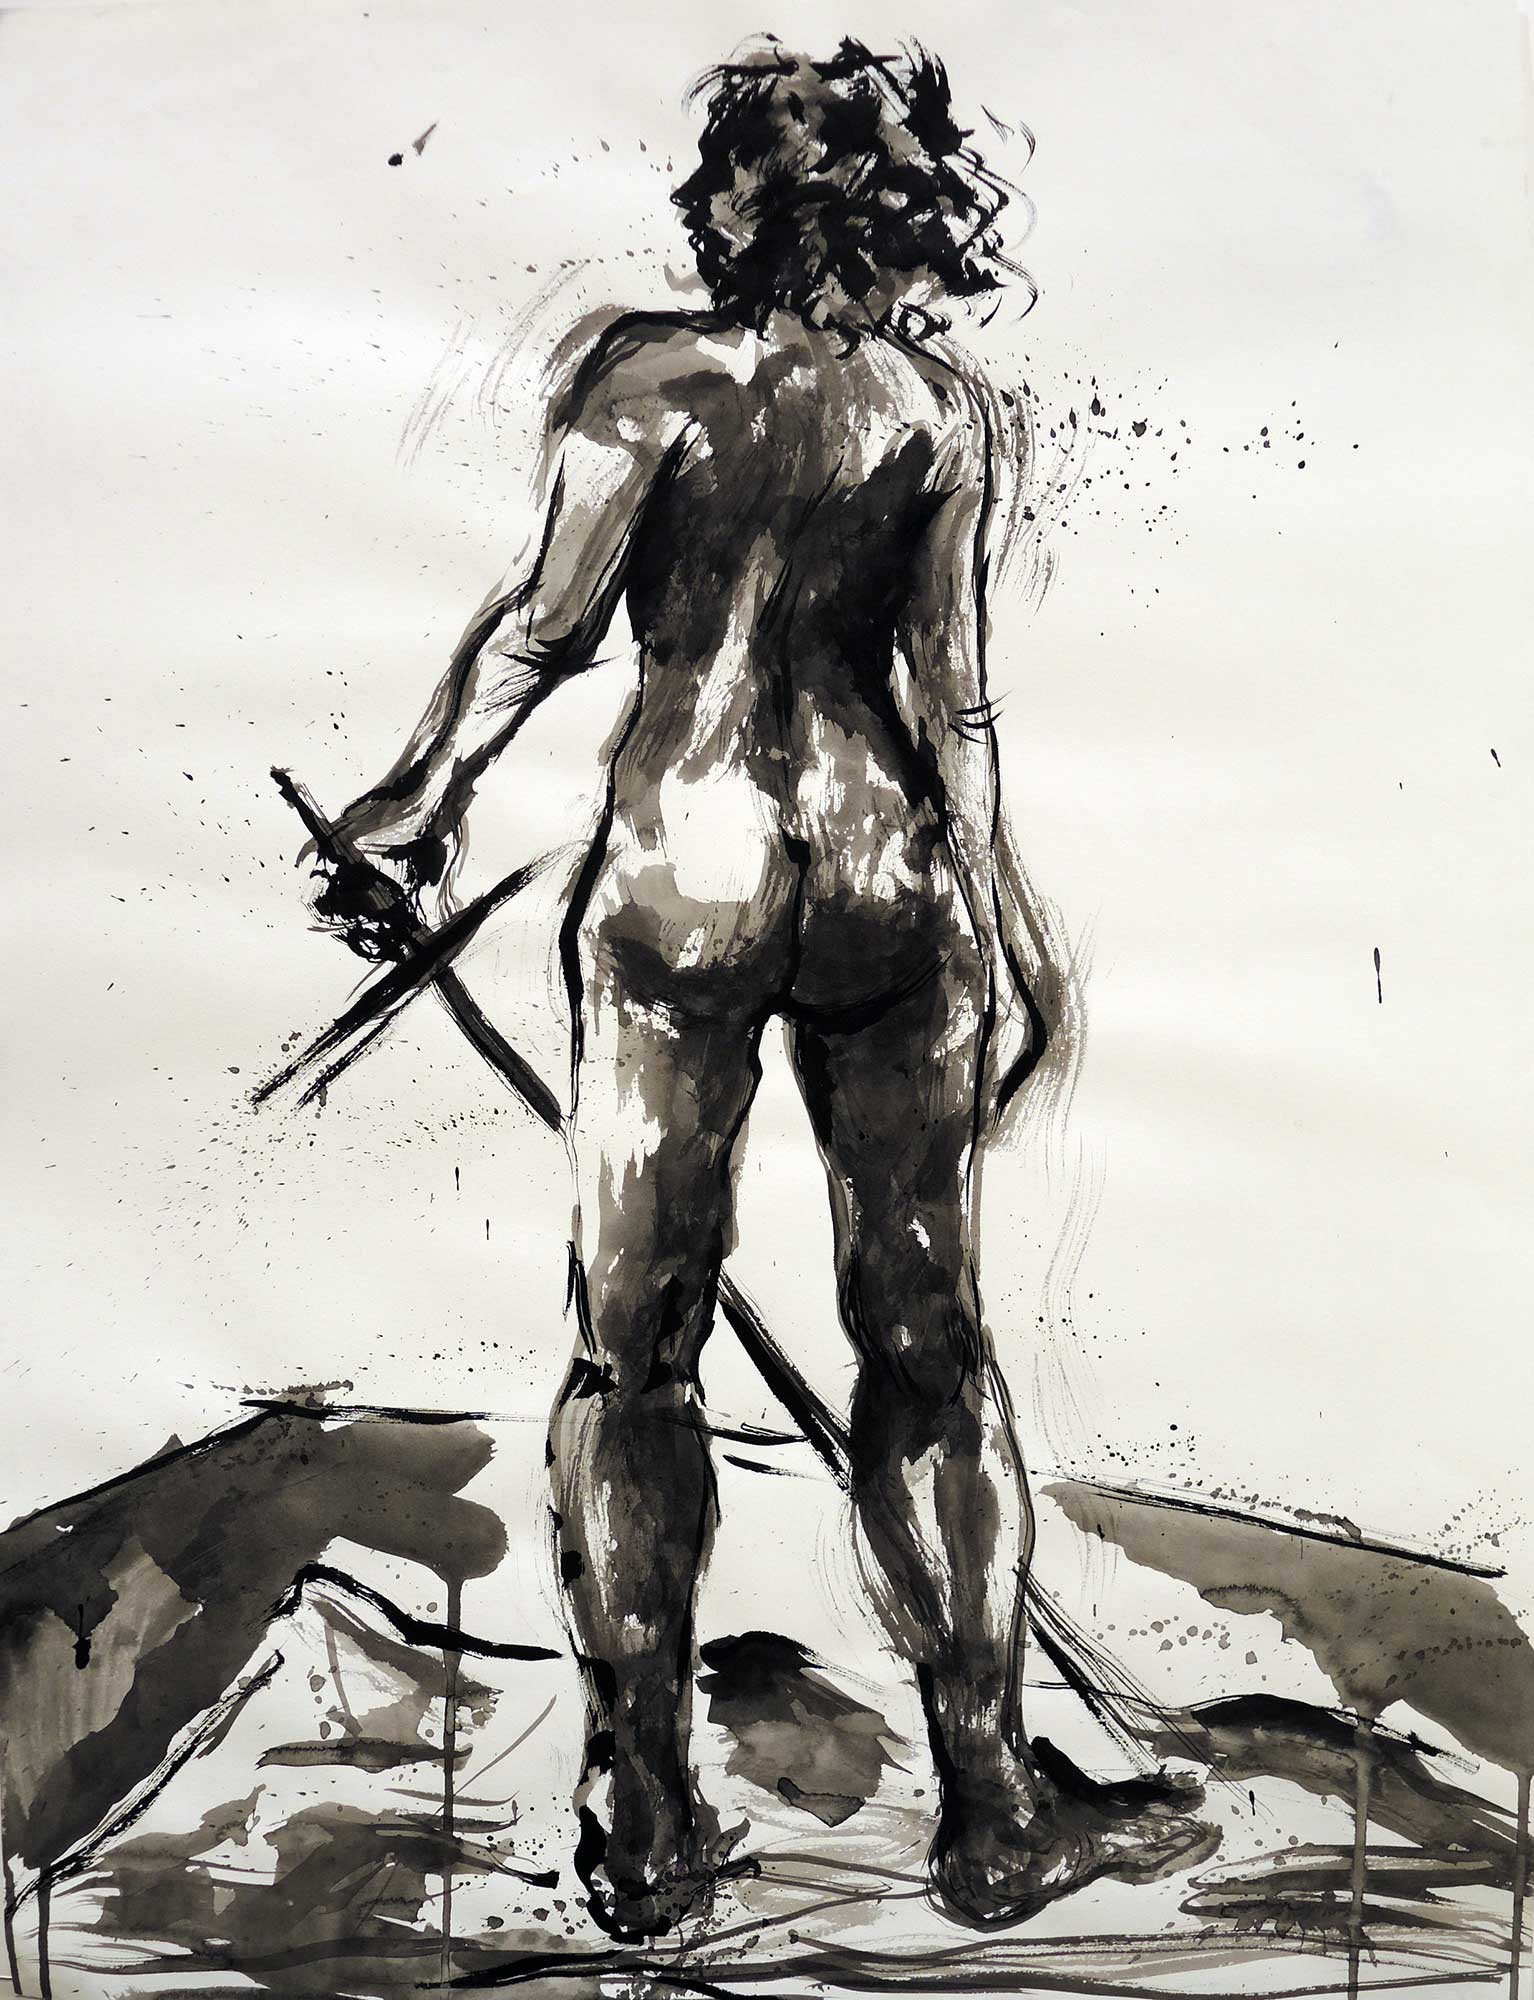 An ink drawing of a person with a sword